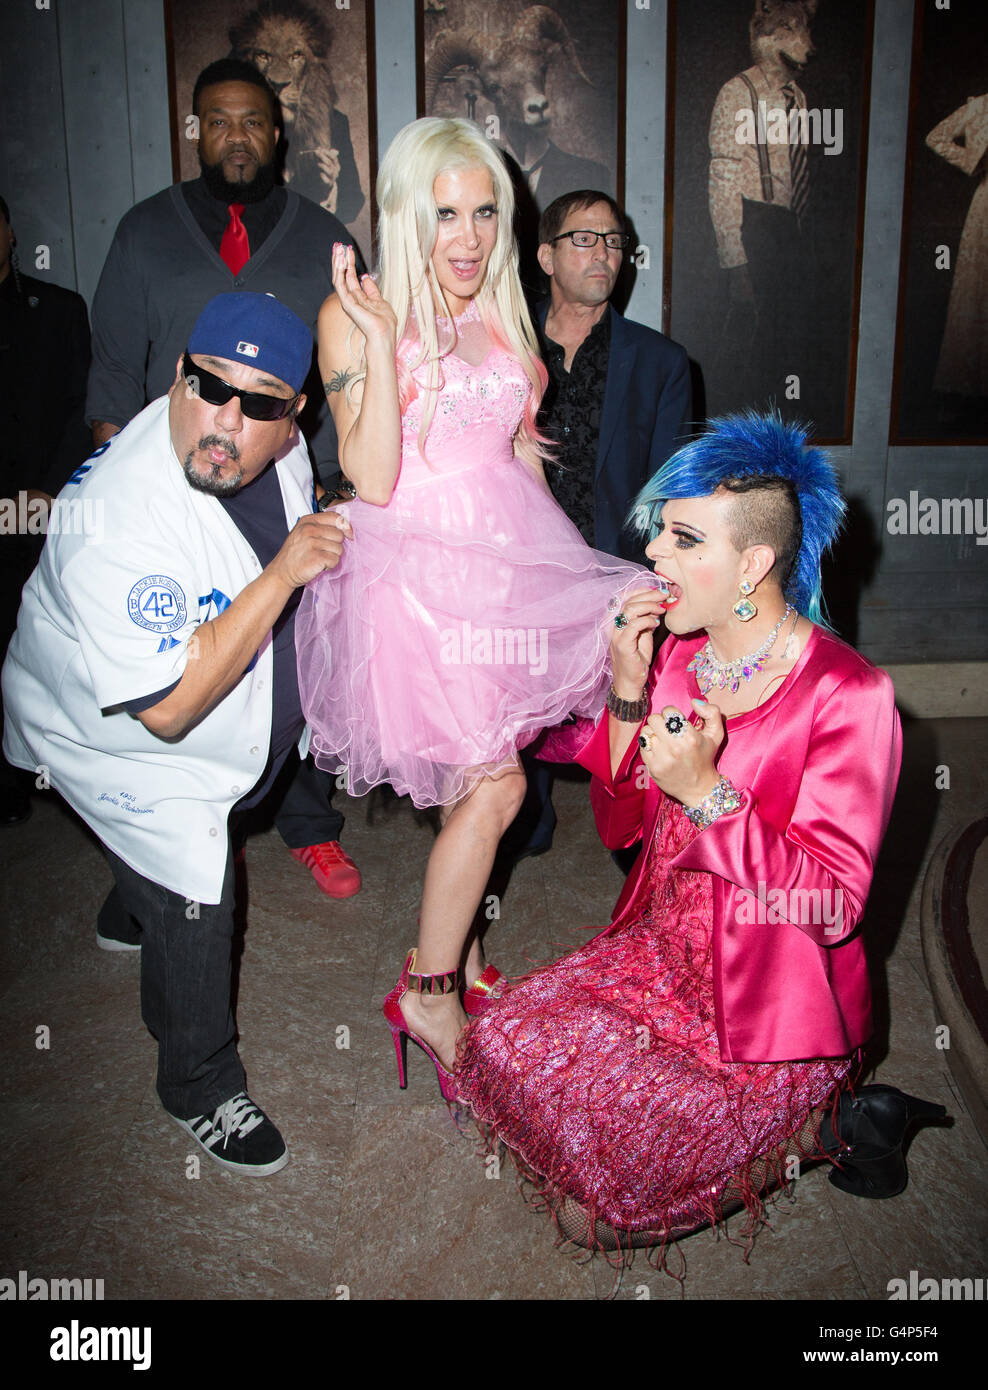 Los Angeles, California, USA. 17th June, 2016. Angelique 'Frenchy' Morgan (center) arrives to her music video release party with comedian Gil Fajardo (left) and artist/TV personality Sham Ibrahim (right) held at The Reserve cocktail club in Los Angeles, California, USA. Credit:  Sheri Determan / Alamy Live News Stock Photo